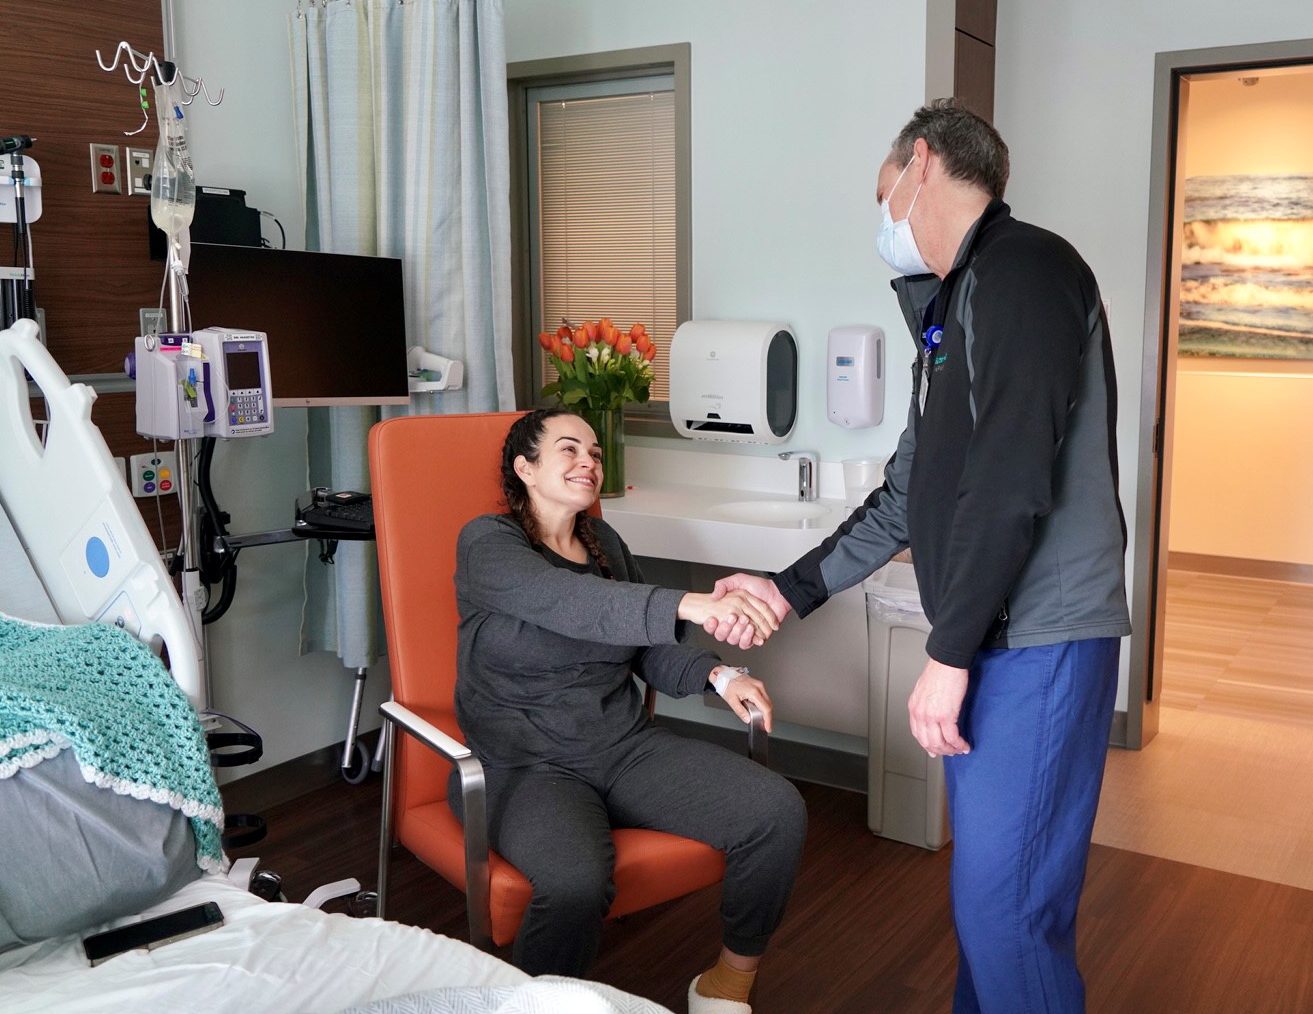 Danielle Rojas sits in her patient room recovering from donating her kidney and her doctor shakes her hand in a show of appreciation.